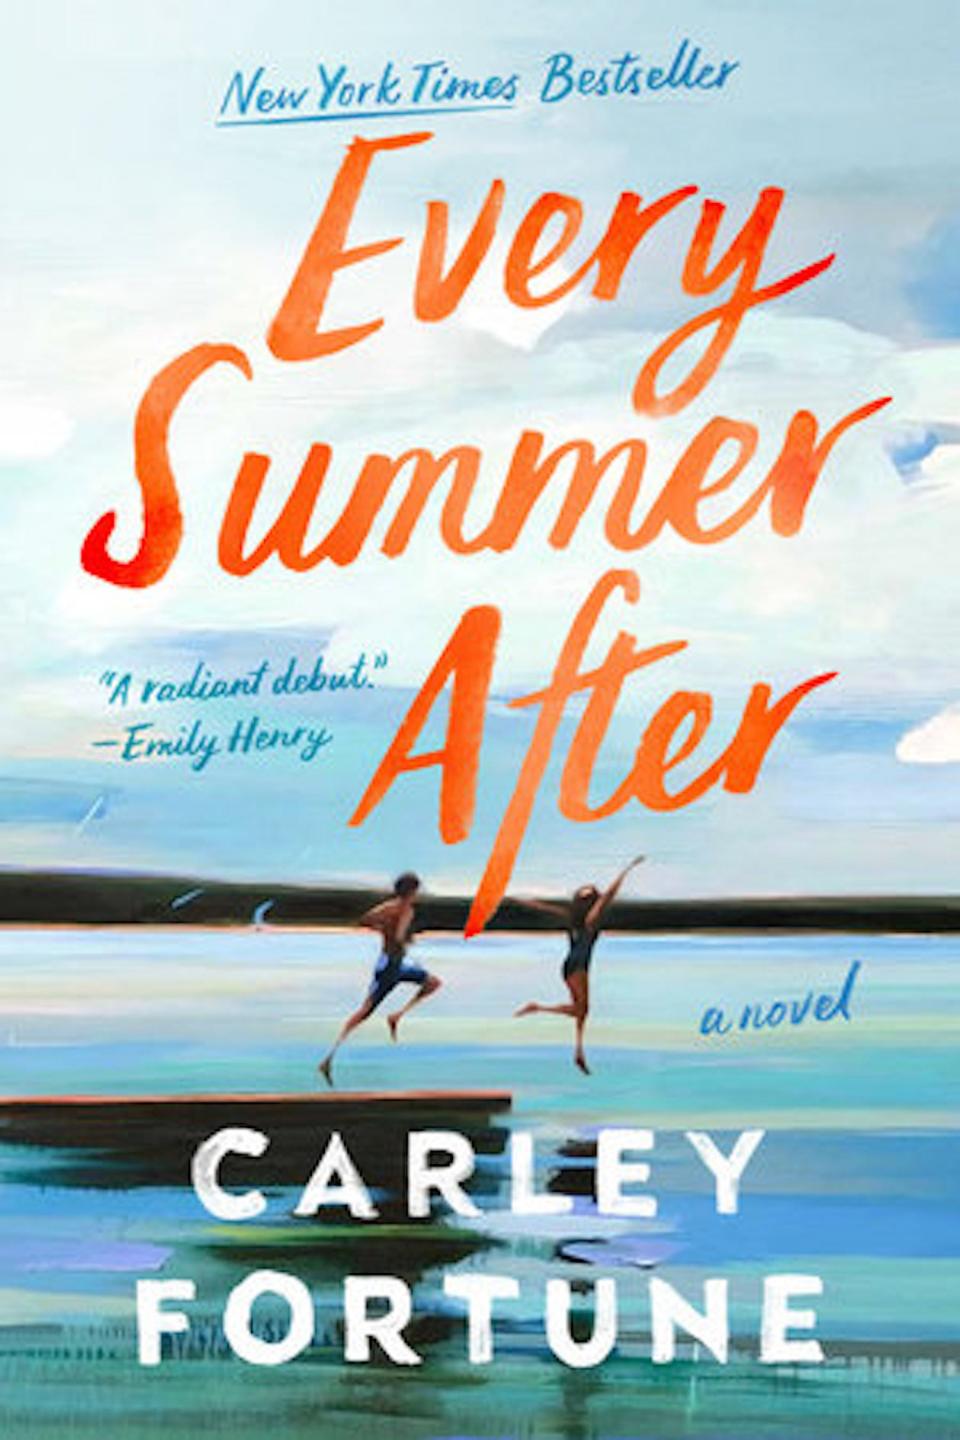 "Every Summer After" by Carley Fortune.